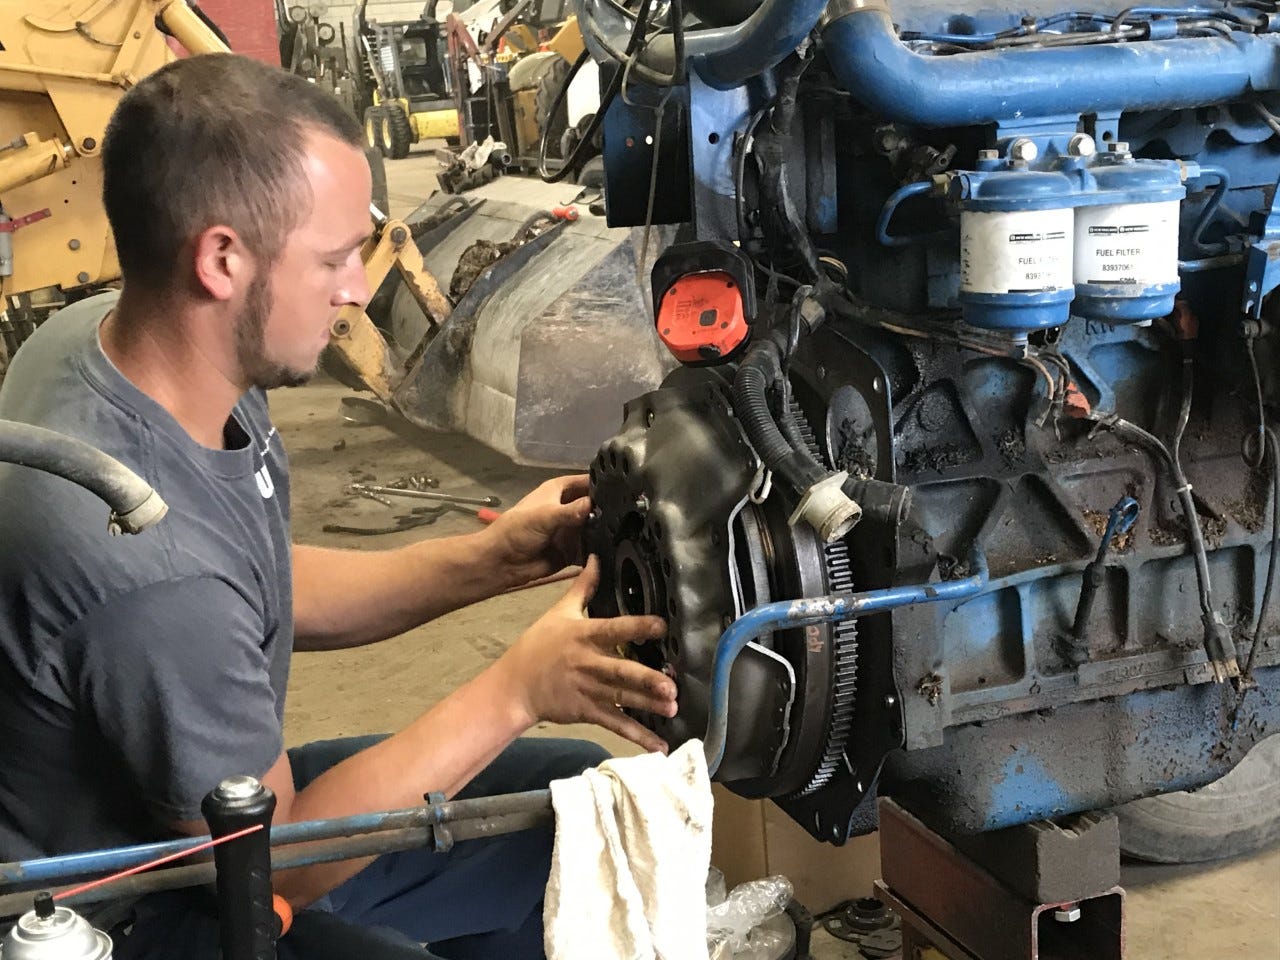 Dan Scheuers, service manager and co-owner of Waupun Equipment, said it’s clear that farmers are holding onto their tractors and equipment longer and choosing to repair it, adding that it has been a challenge keeping up with repairs.